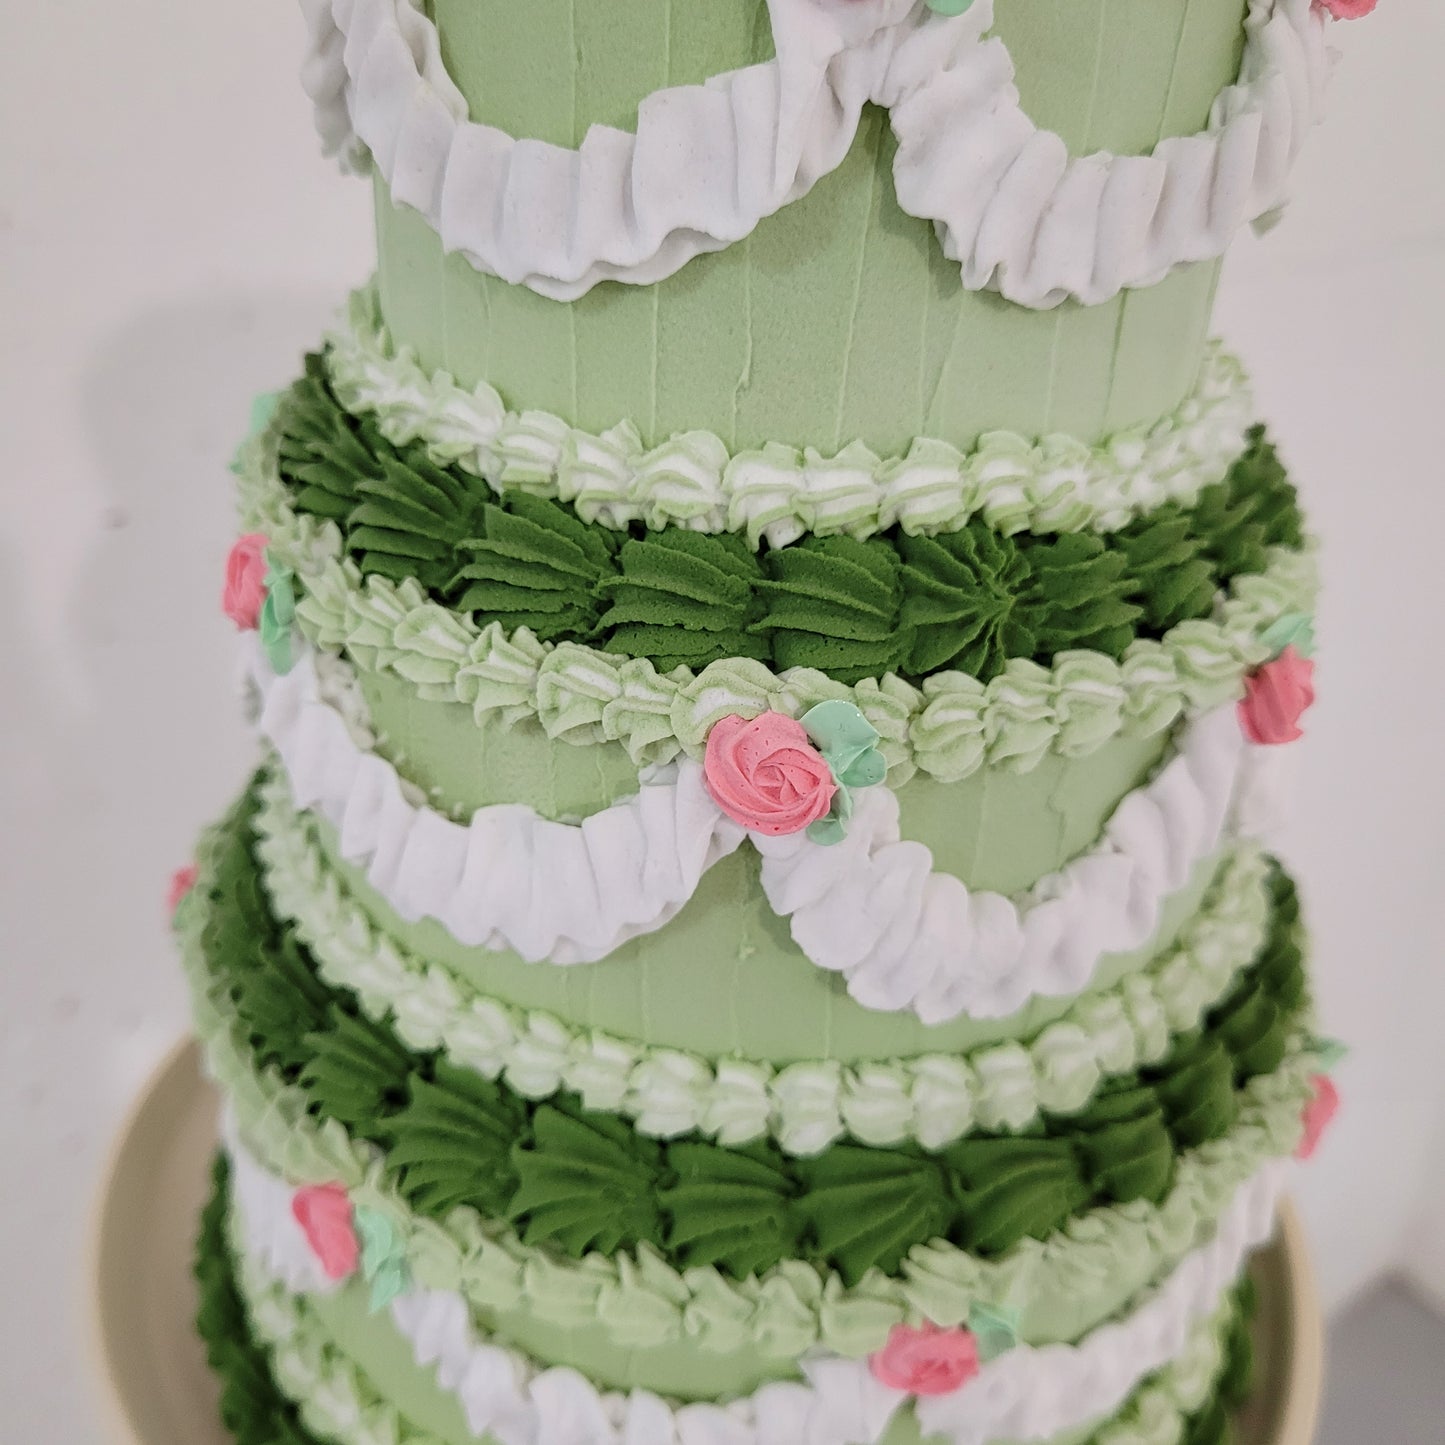 Green Dream 3 Tiered Cake Sculpture | 7" by 8.5"